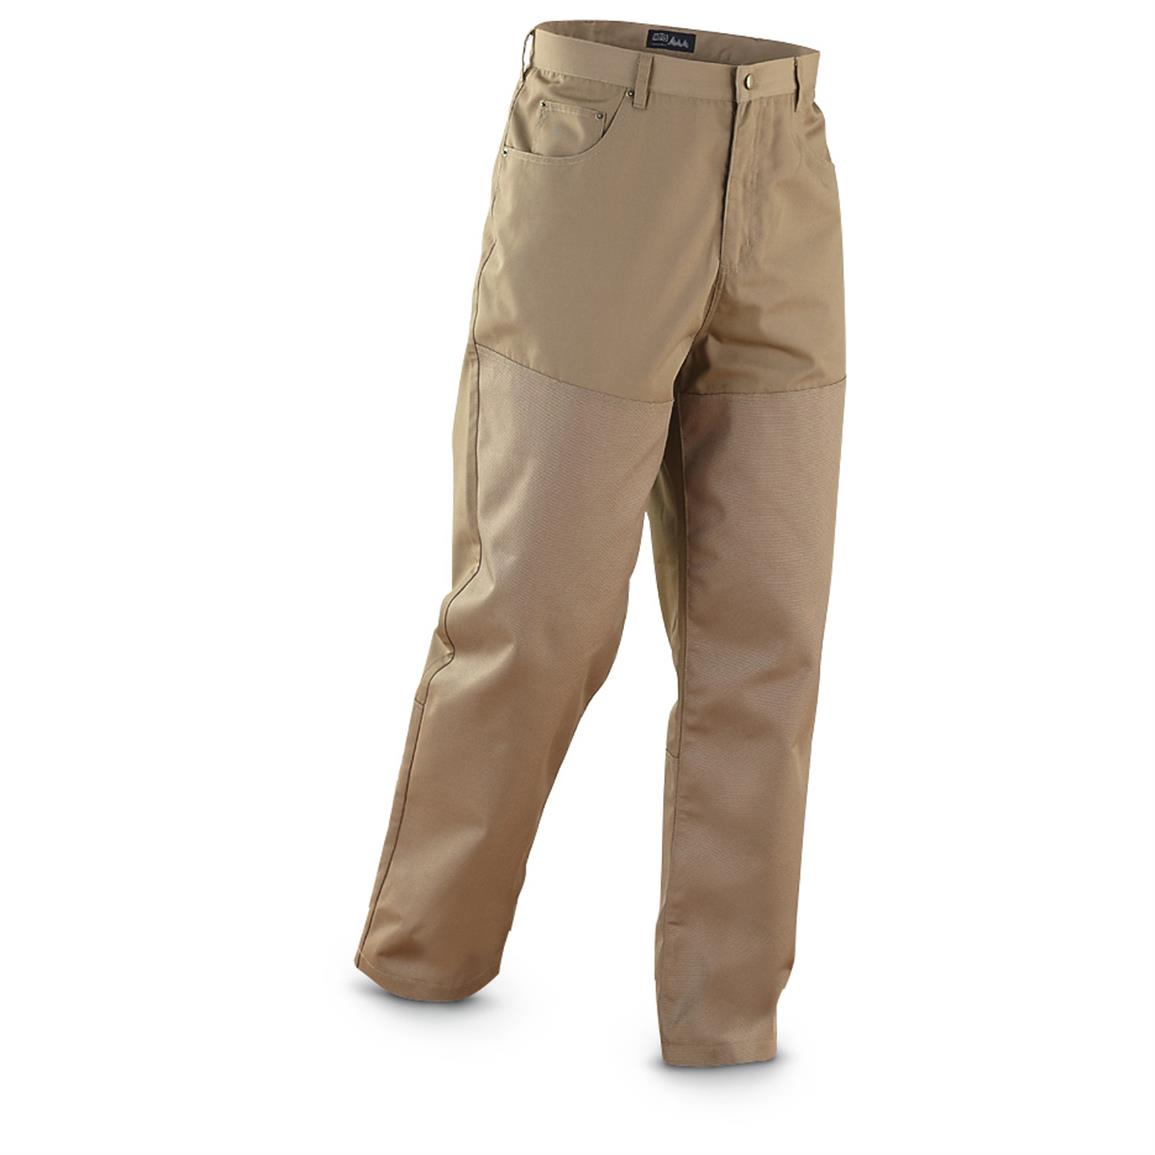 WFS Upland Game Hunting Pants - 609565, Jeans & Pants at Sportsman's Guide